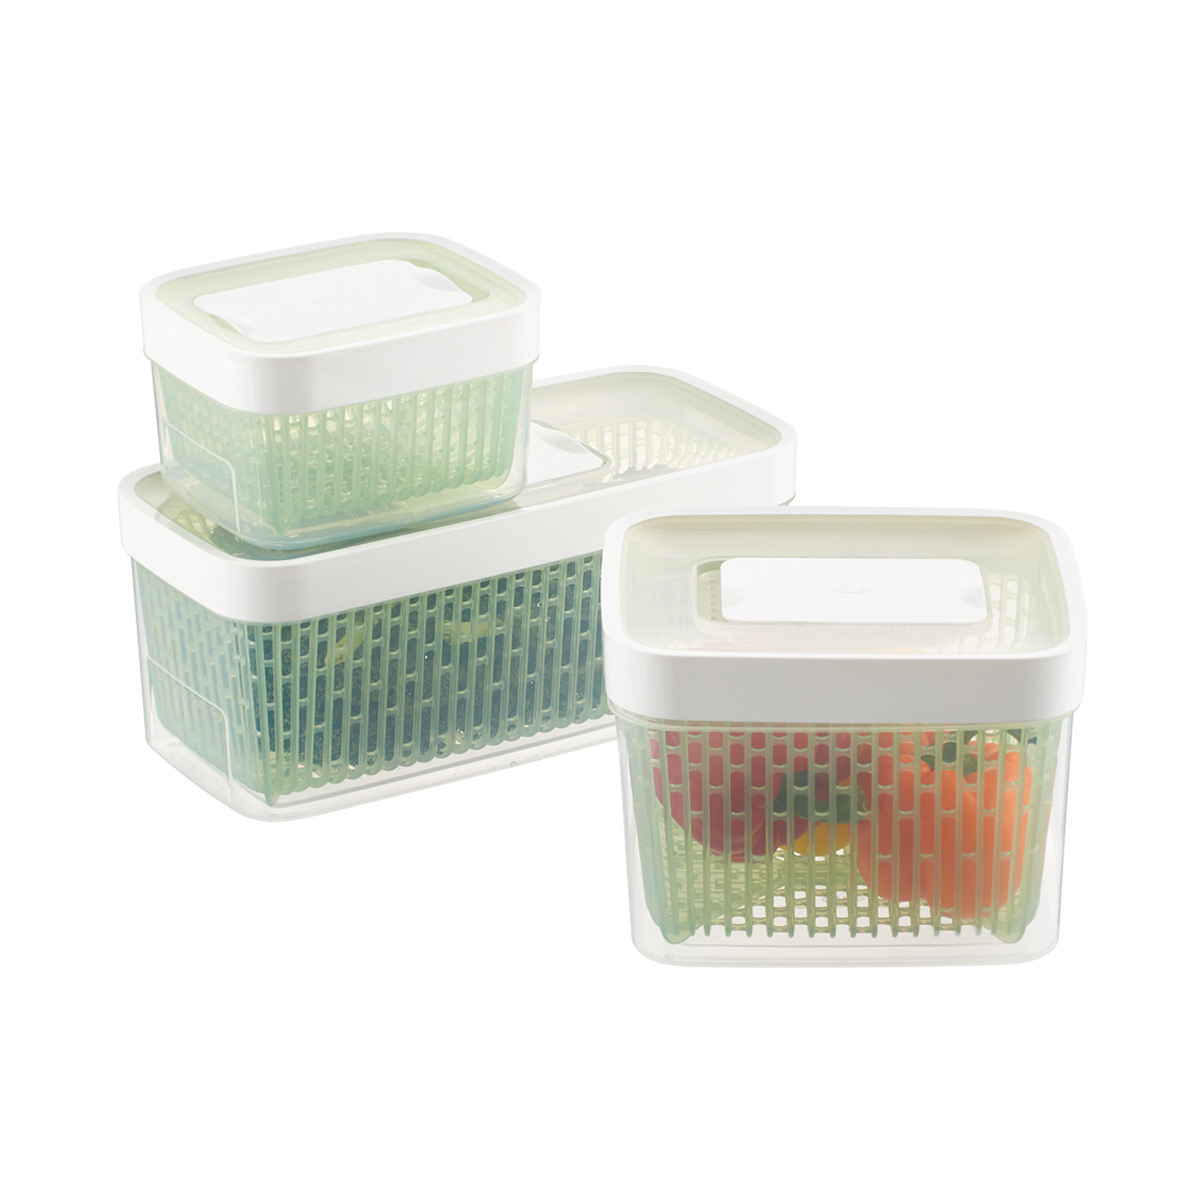 https://www.containerstore.com/catalogimages/436923/10066185g-greensaver.jpg